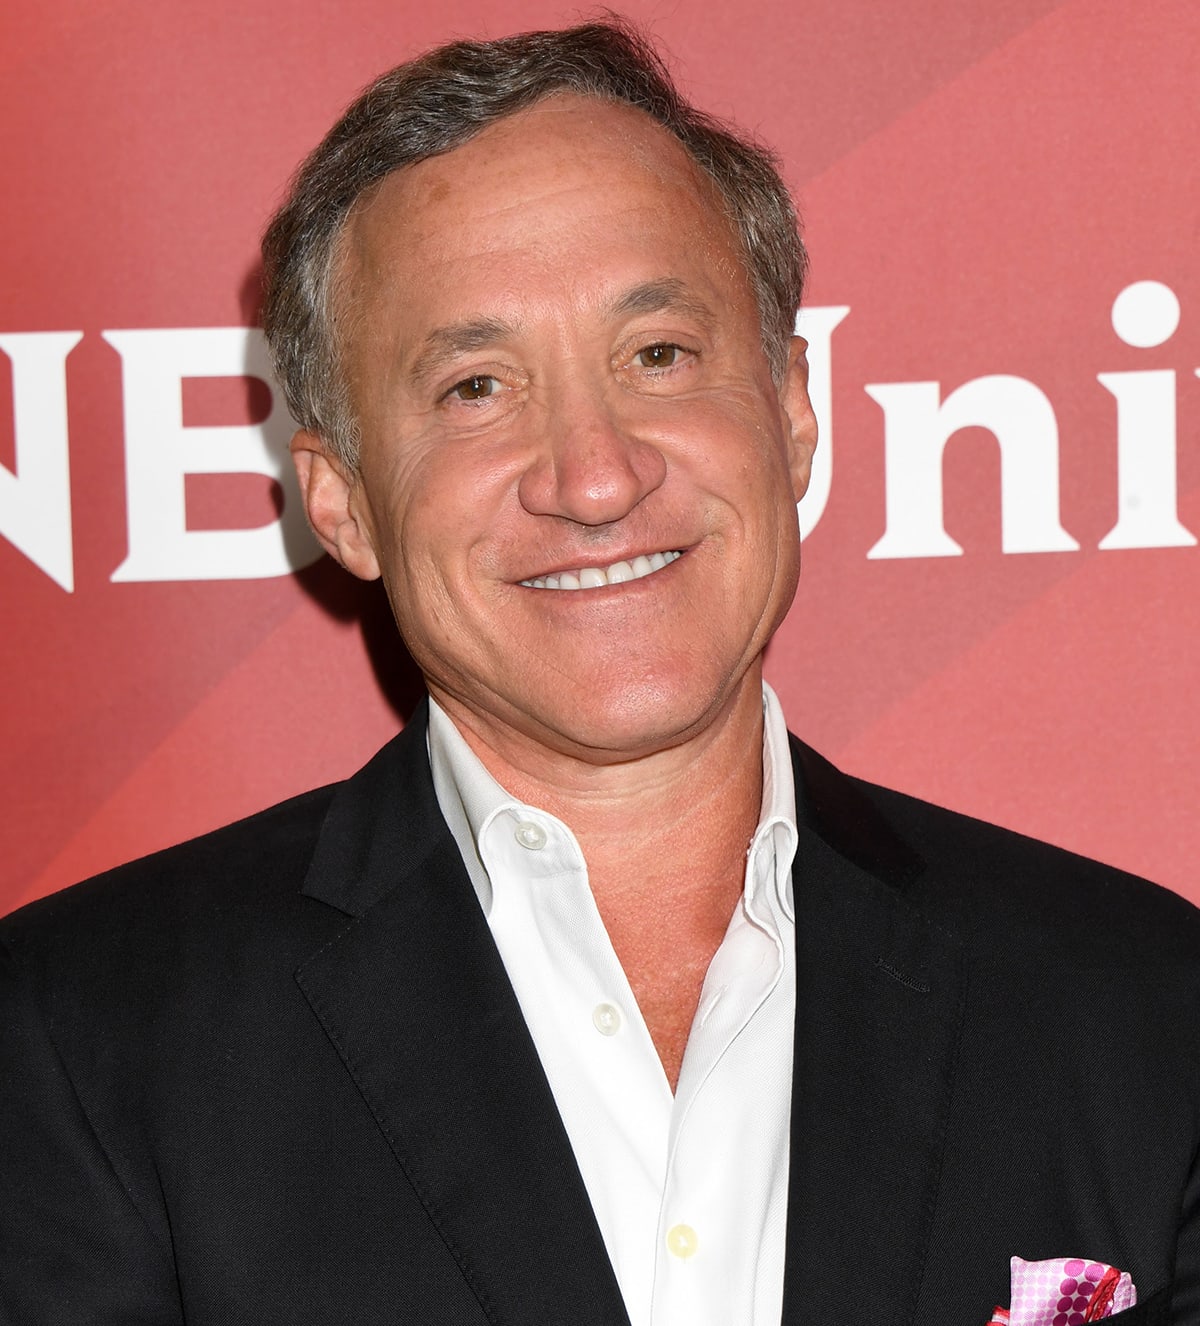 Terry Dubrow is a well-known American plastic surgeon and television personality who has appeared on shows such as Botched and The Real Housewives of Orange County